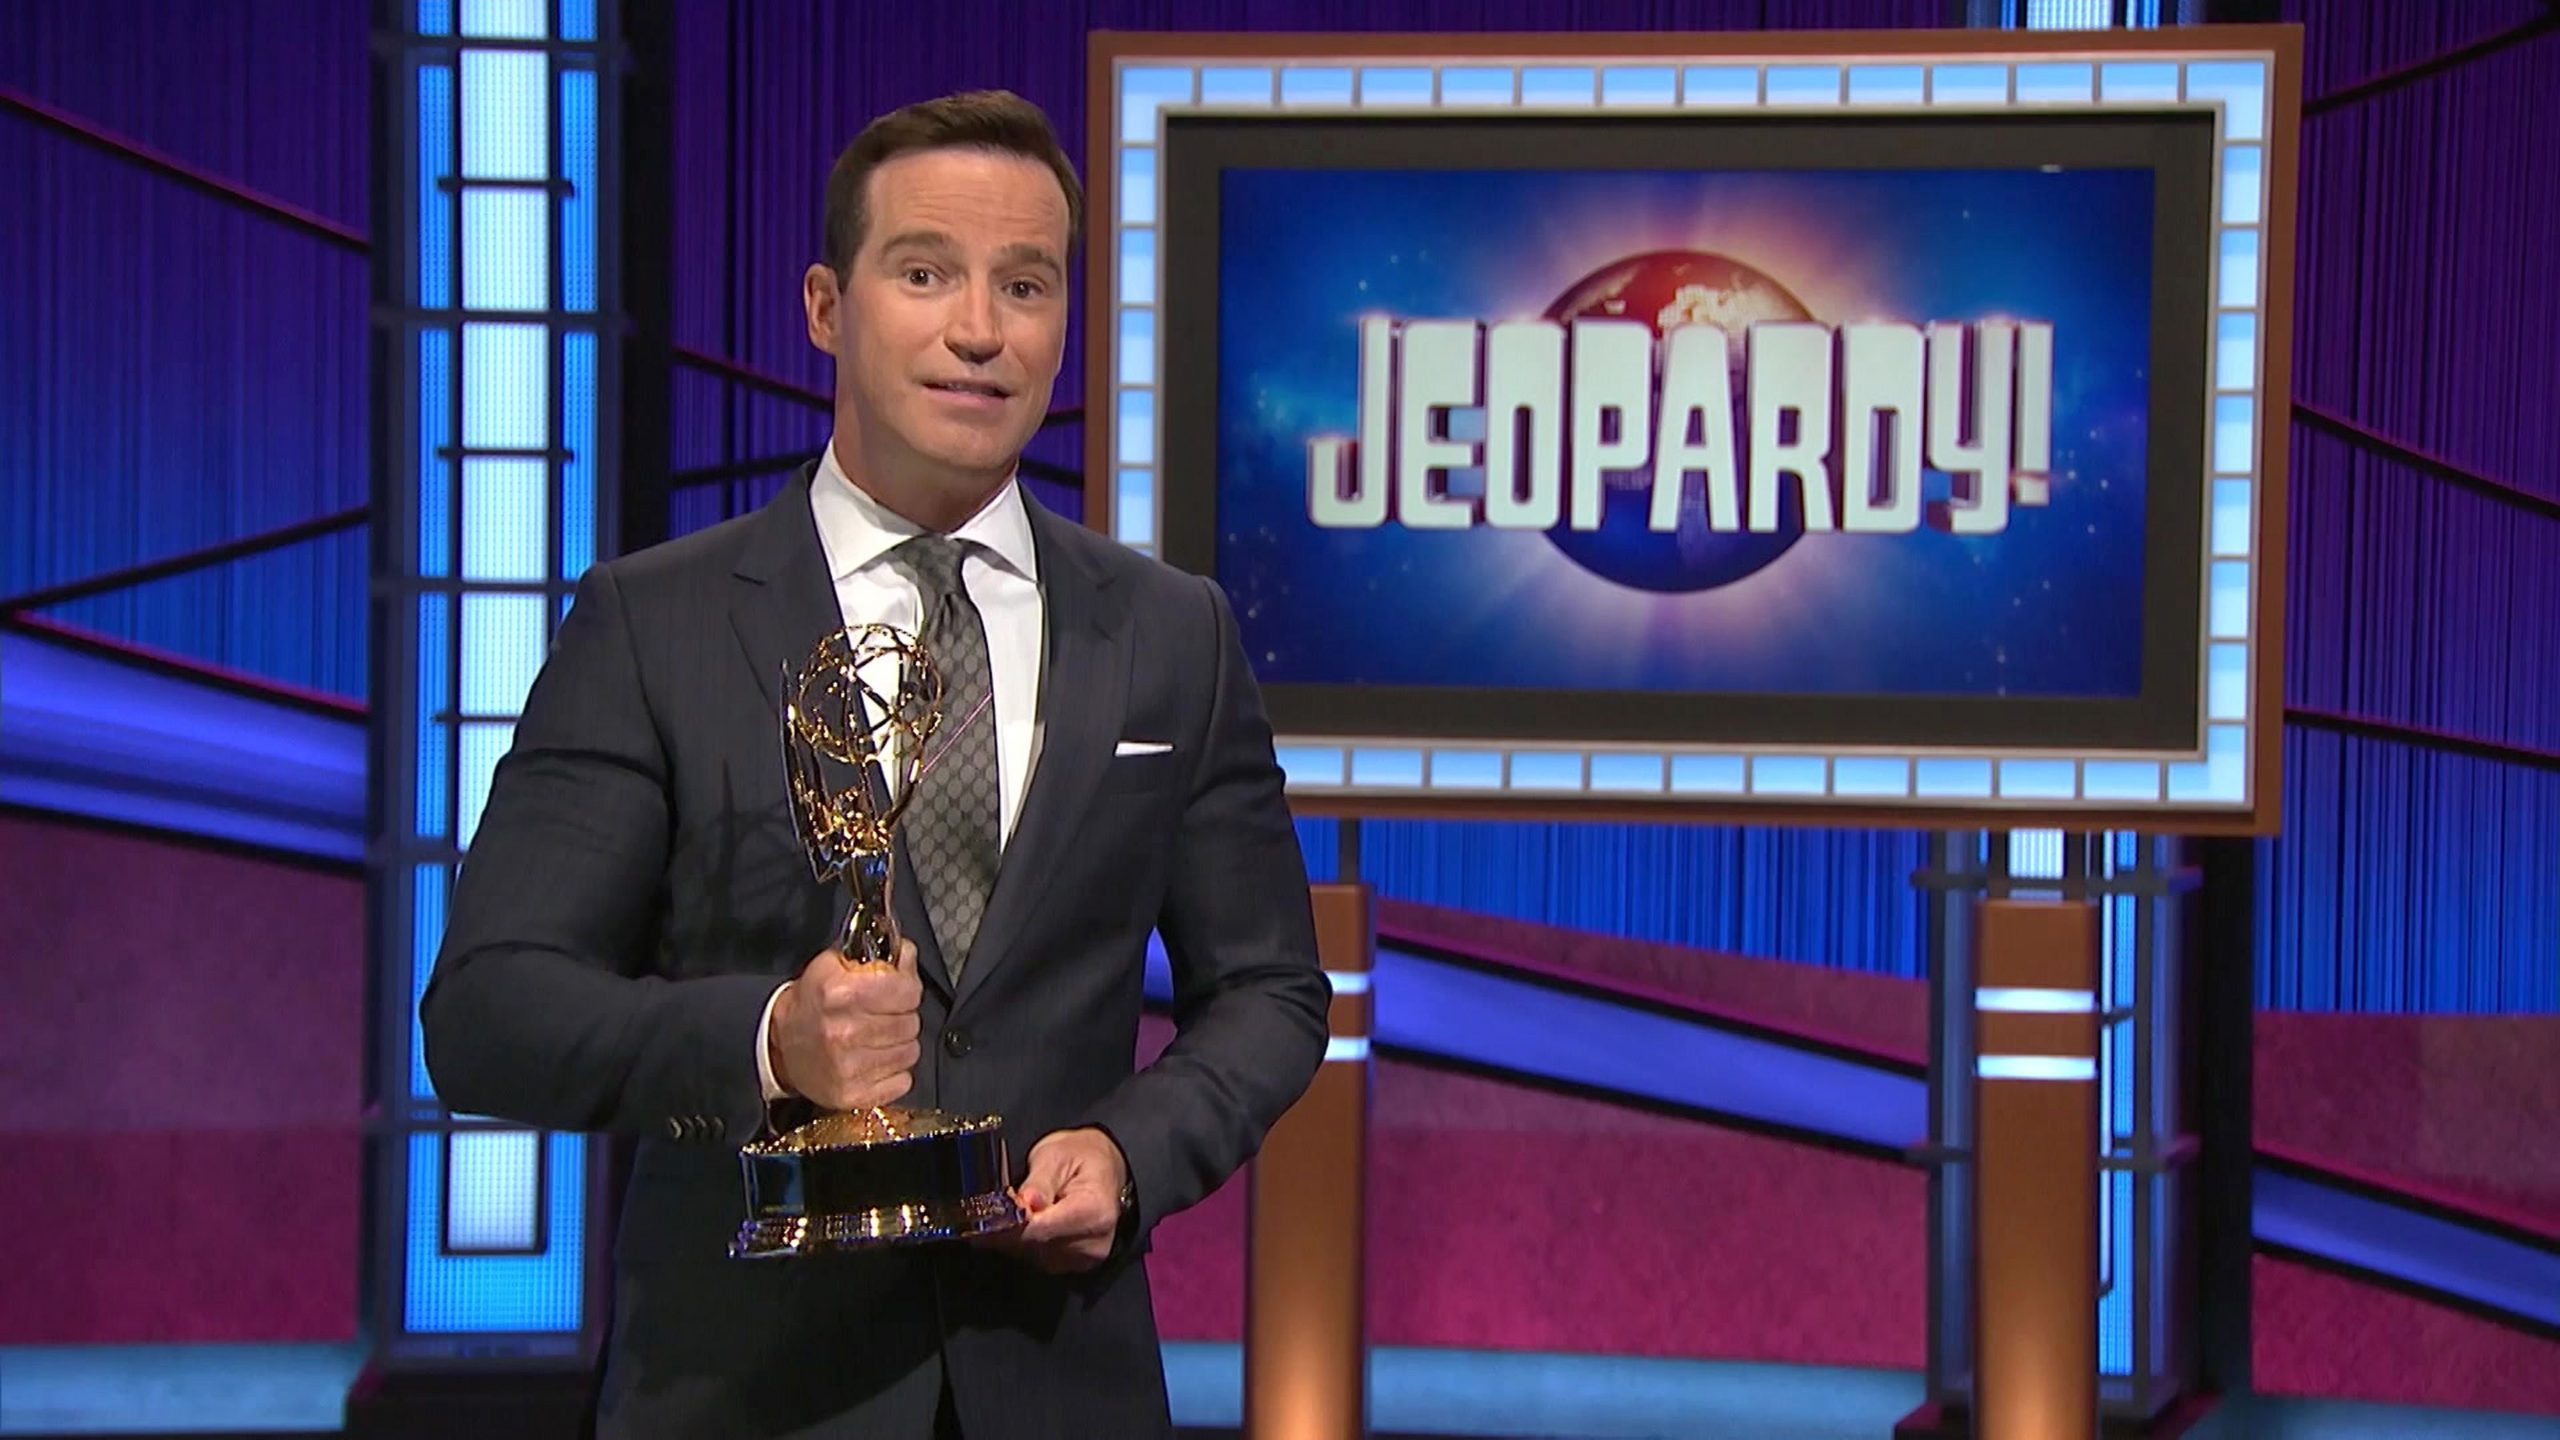 'Jeopardy!'s executive producer and new host Mike Richards